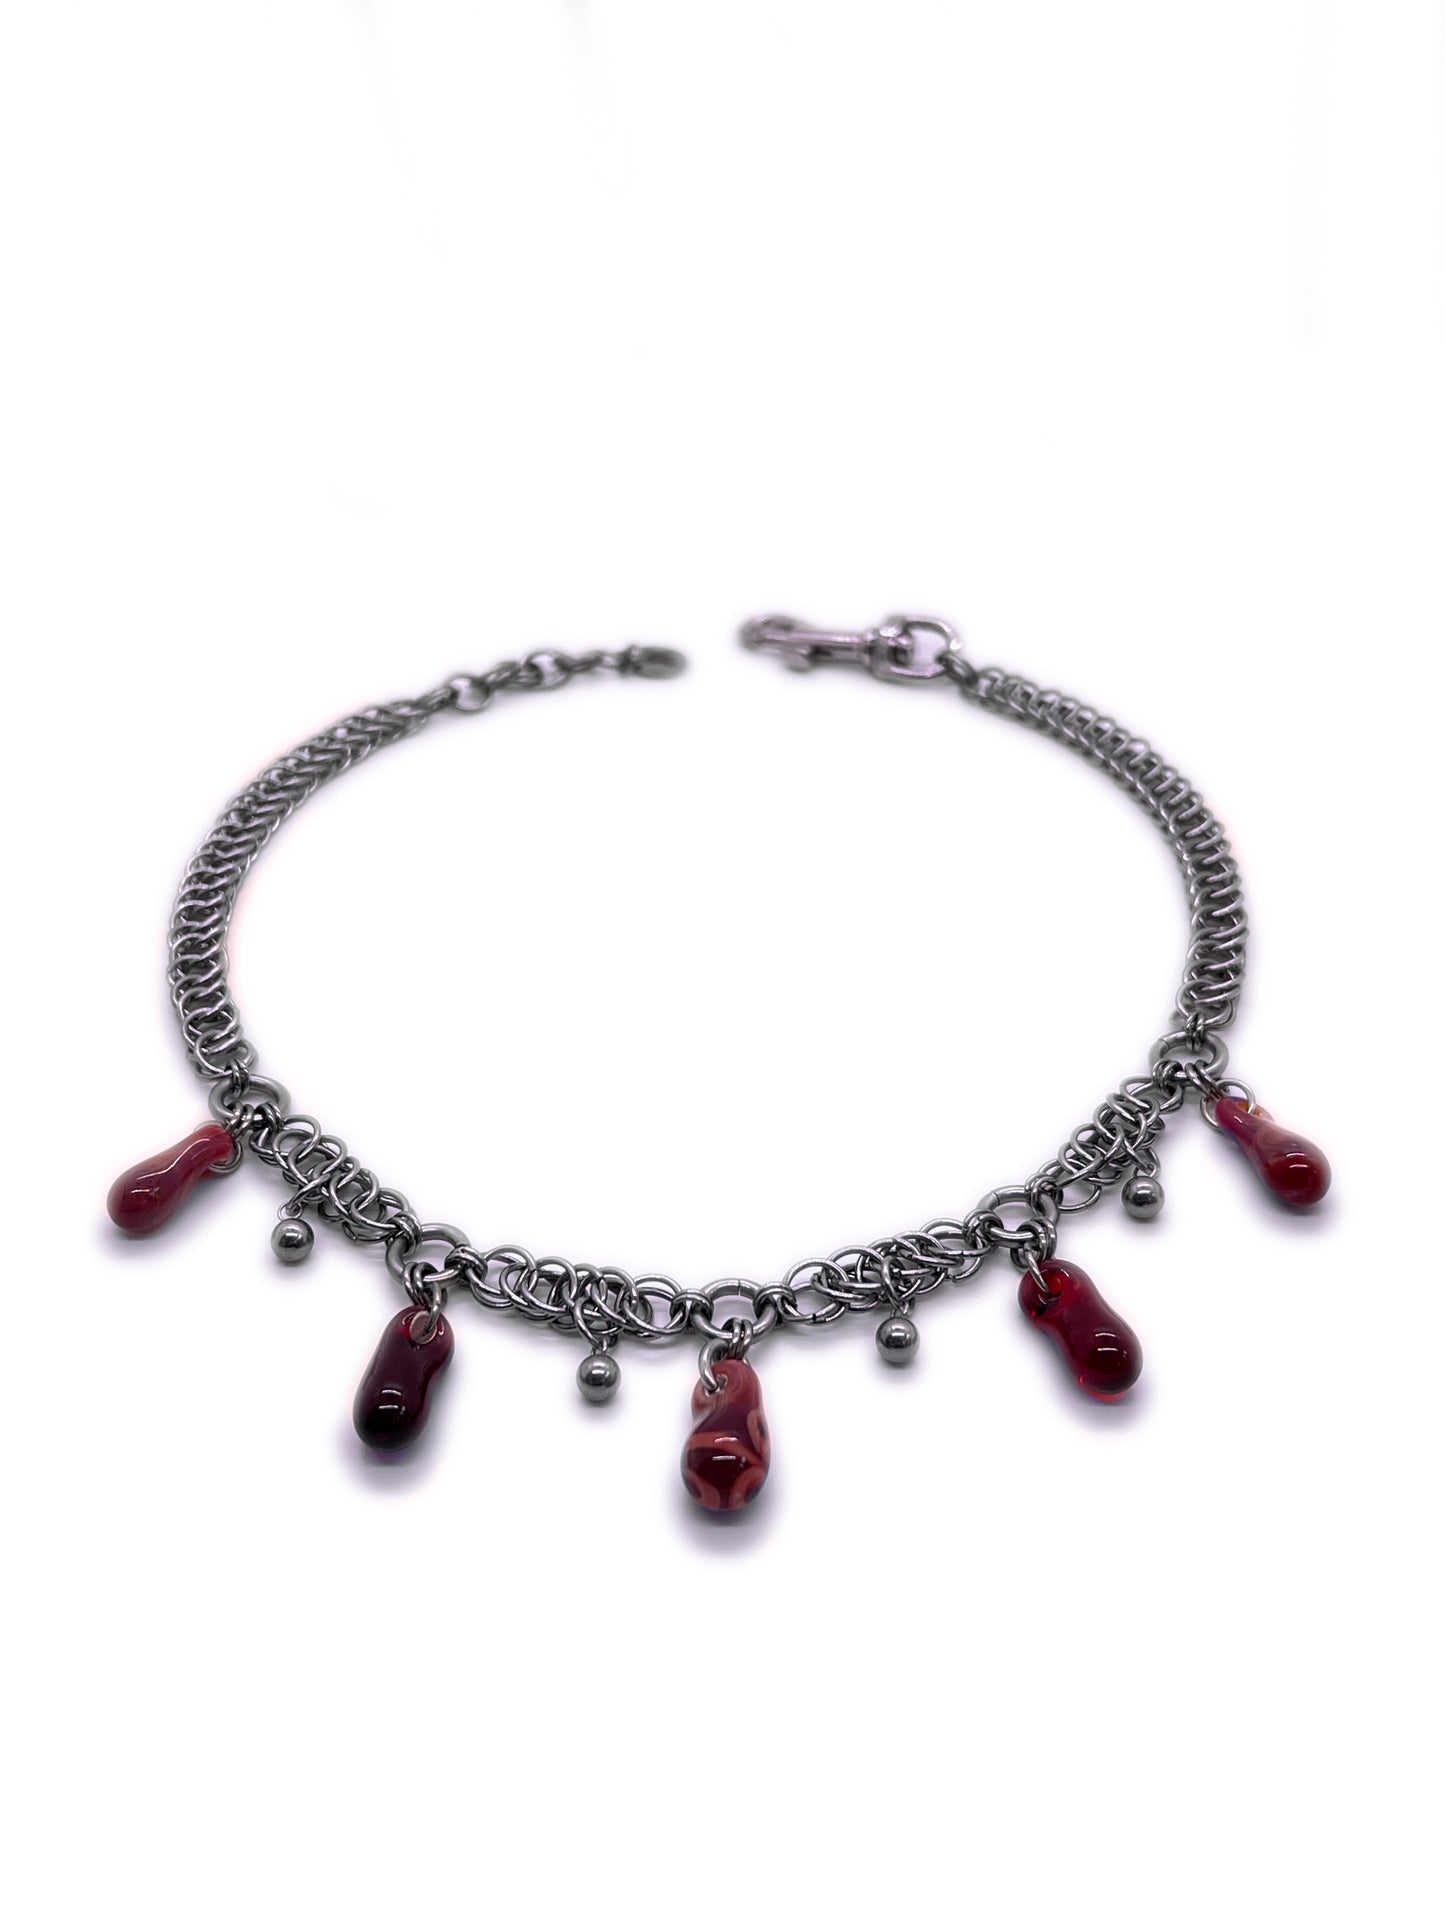 Blood Bead Necklace